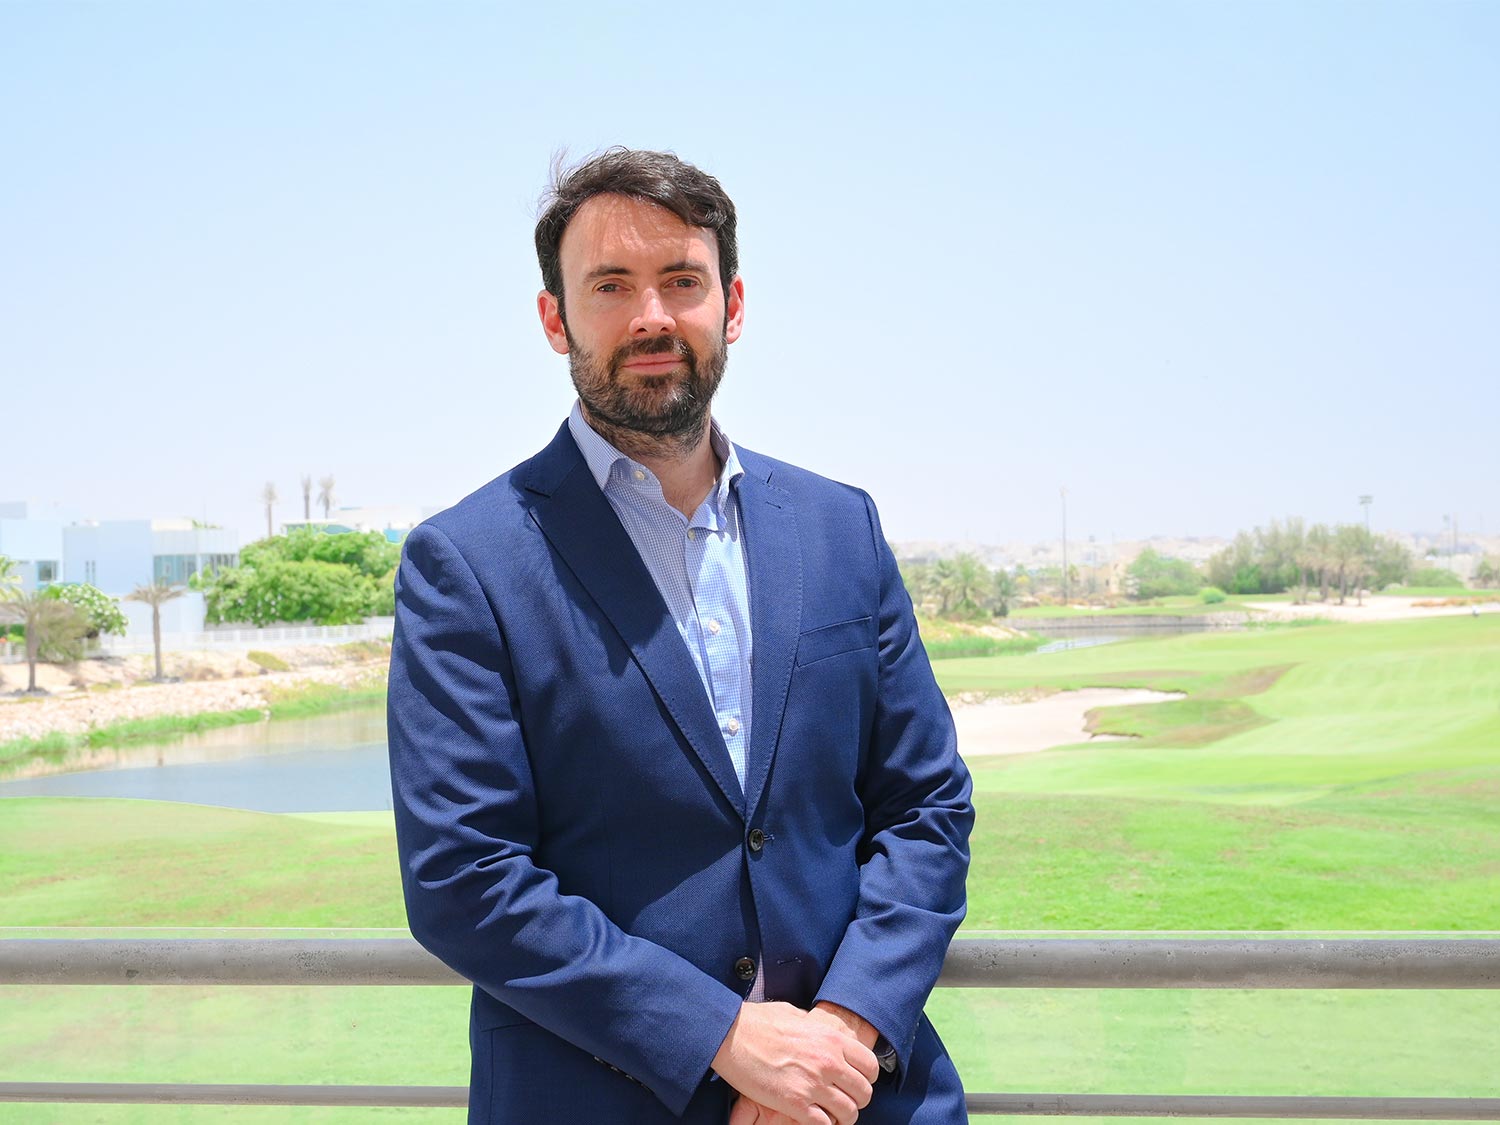 The Royal Golf Club General Manager